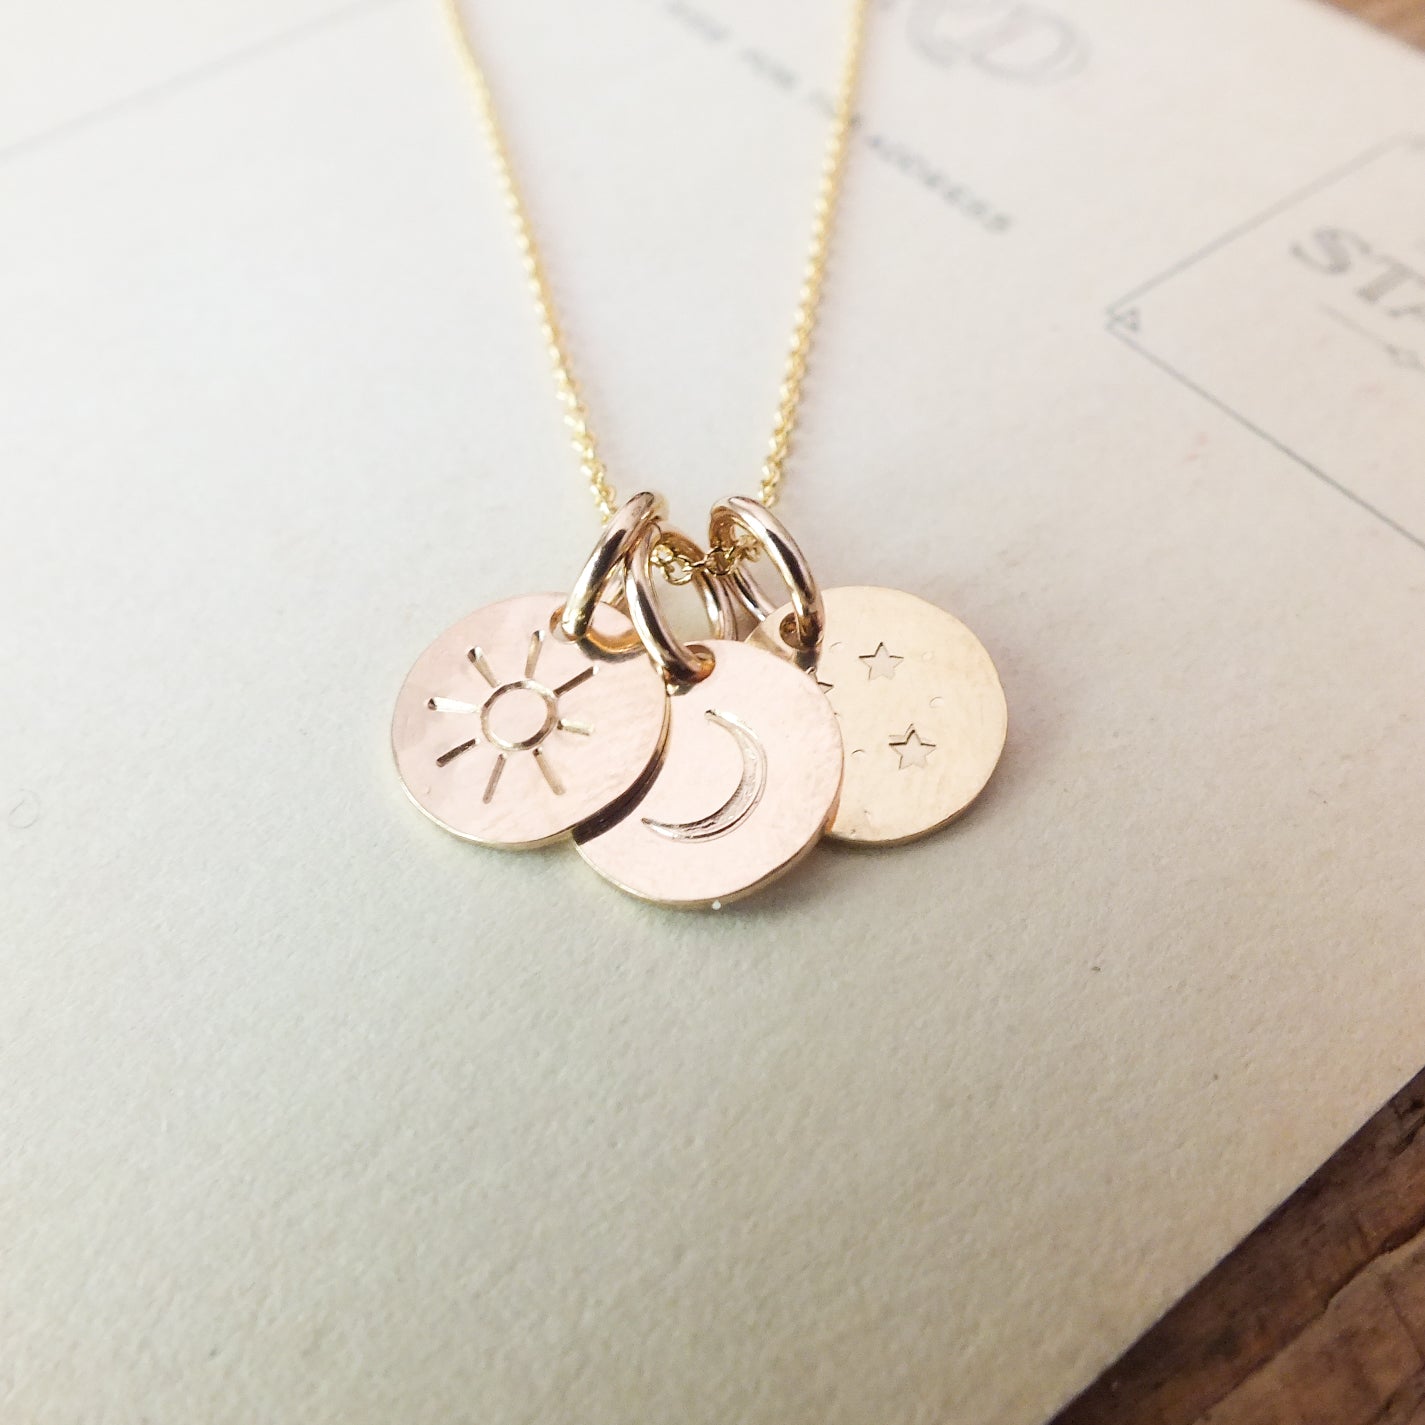 Becoming Jewelry&#39;s Gold-filled Sun Moon and Stars Necklace on wooden surface.